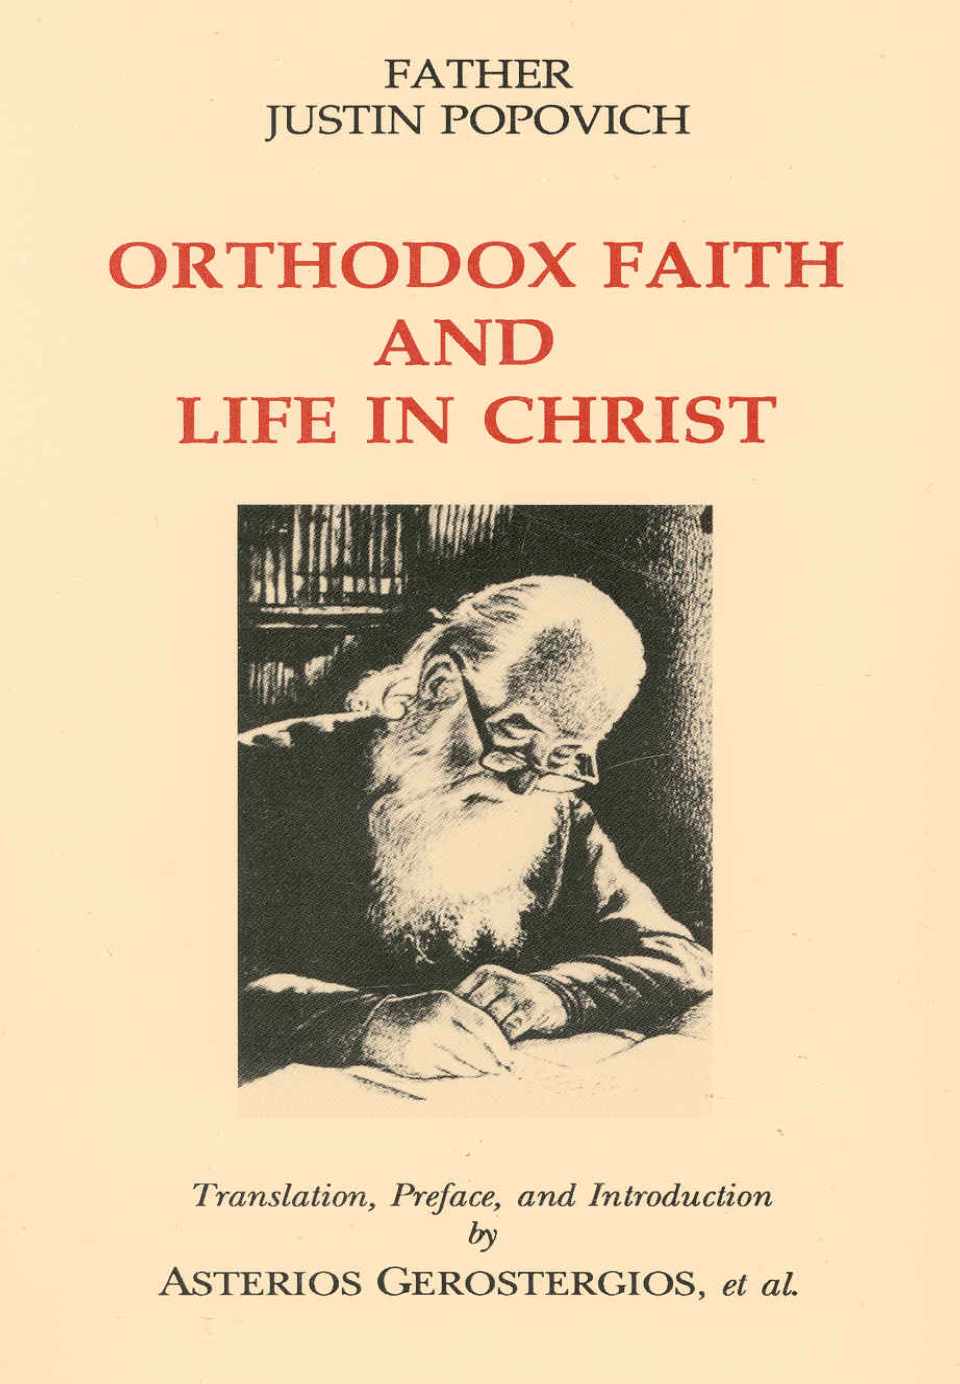 orthodox-faith-and-life-in-christ-justin-popovich-book-cover.jpg